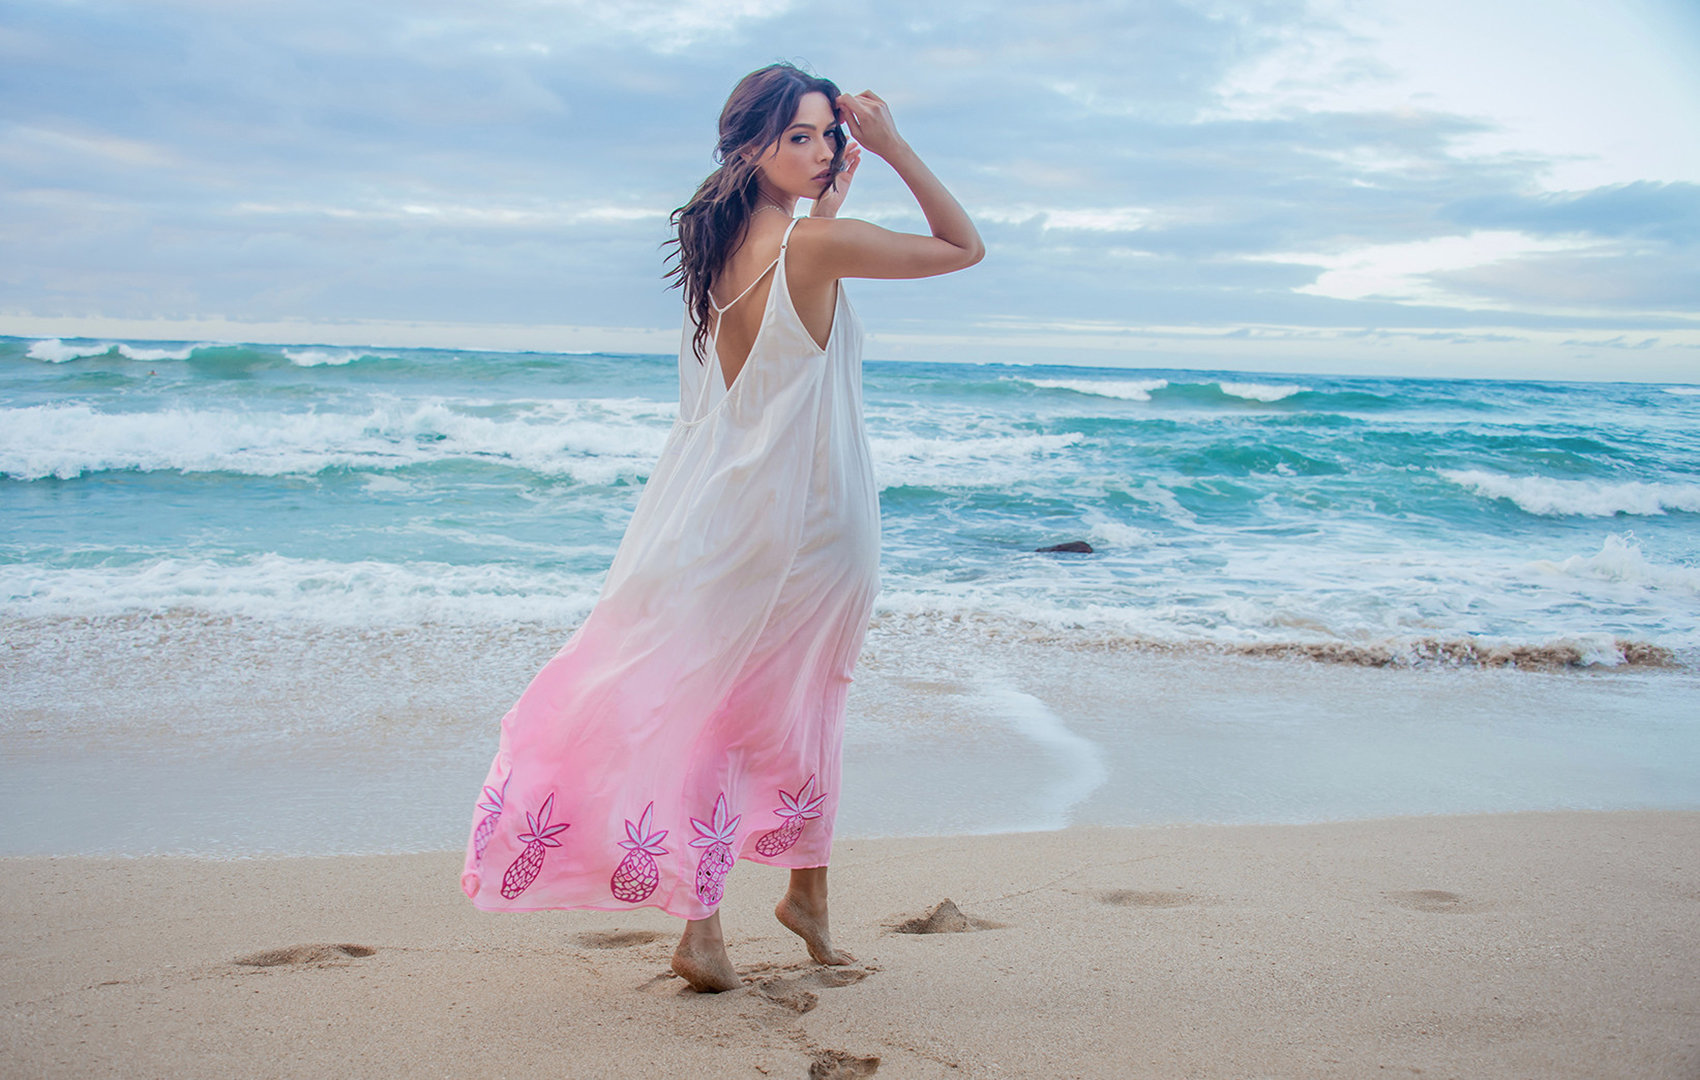 Model wearing an Aloha dress on the beach on MAUI, blowing in the wind.